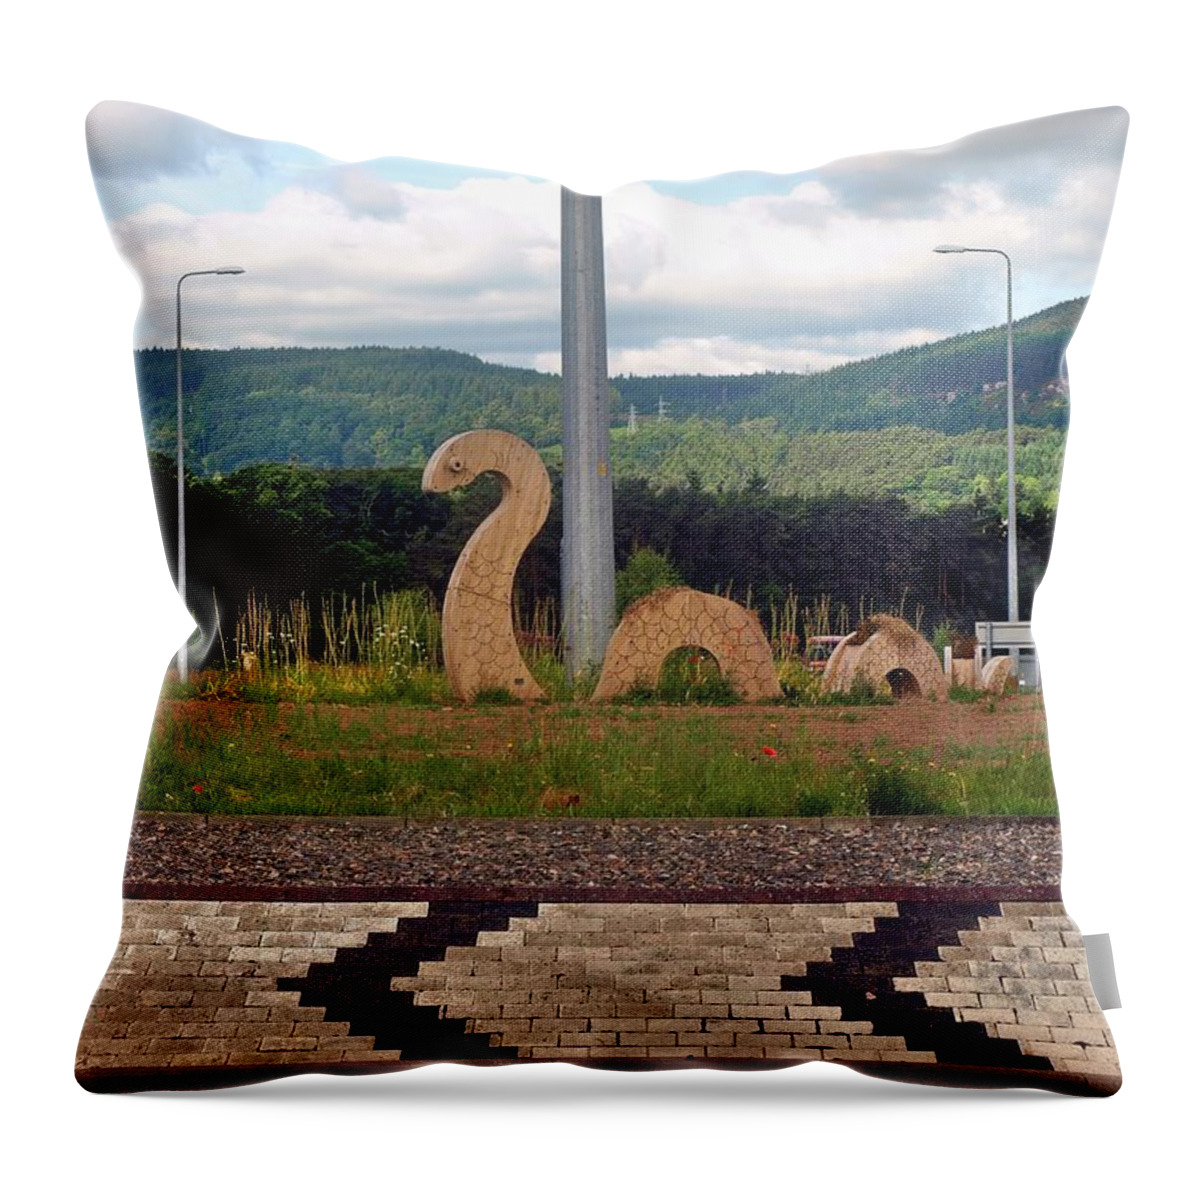 Nessie Throw Pillow featuring the photograph Nessie Sculpture by Richard Thomas